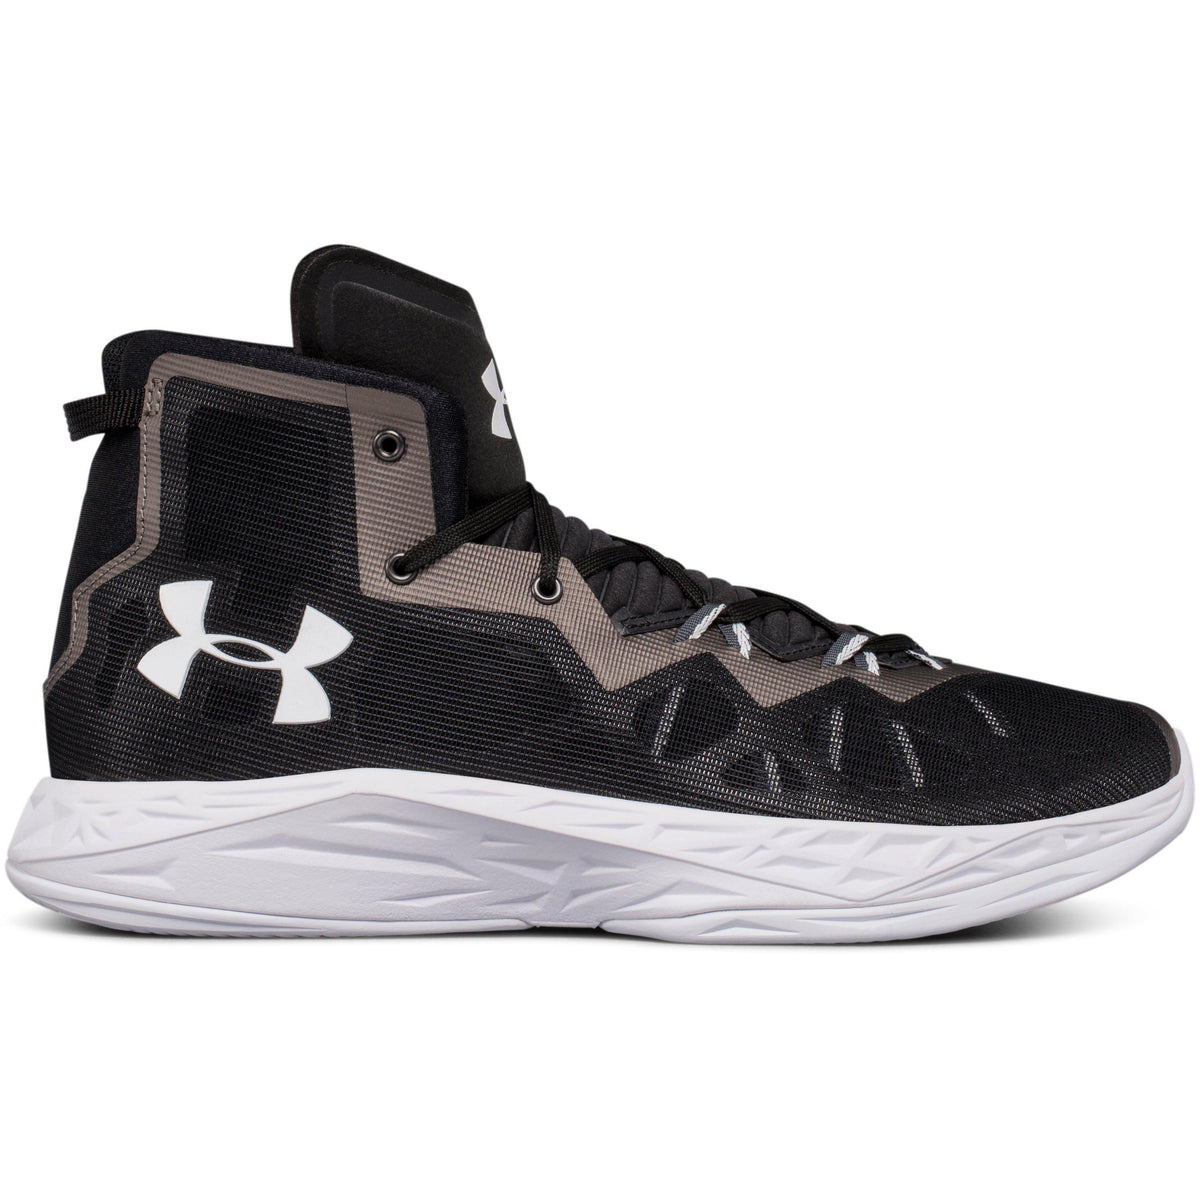 Under Armour Women's Lightning 4 Shoes 